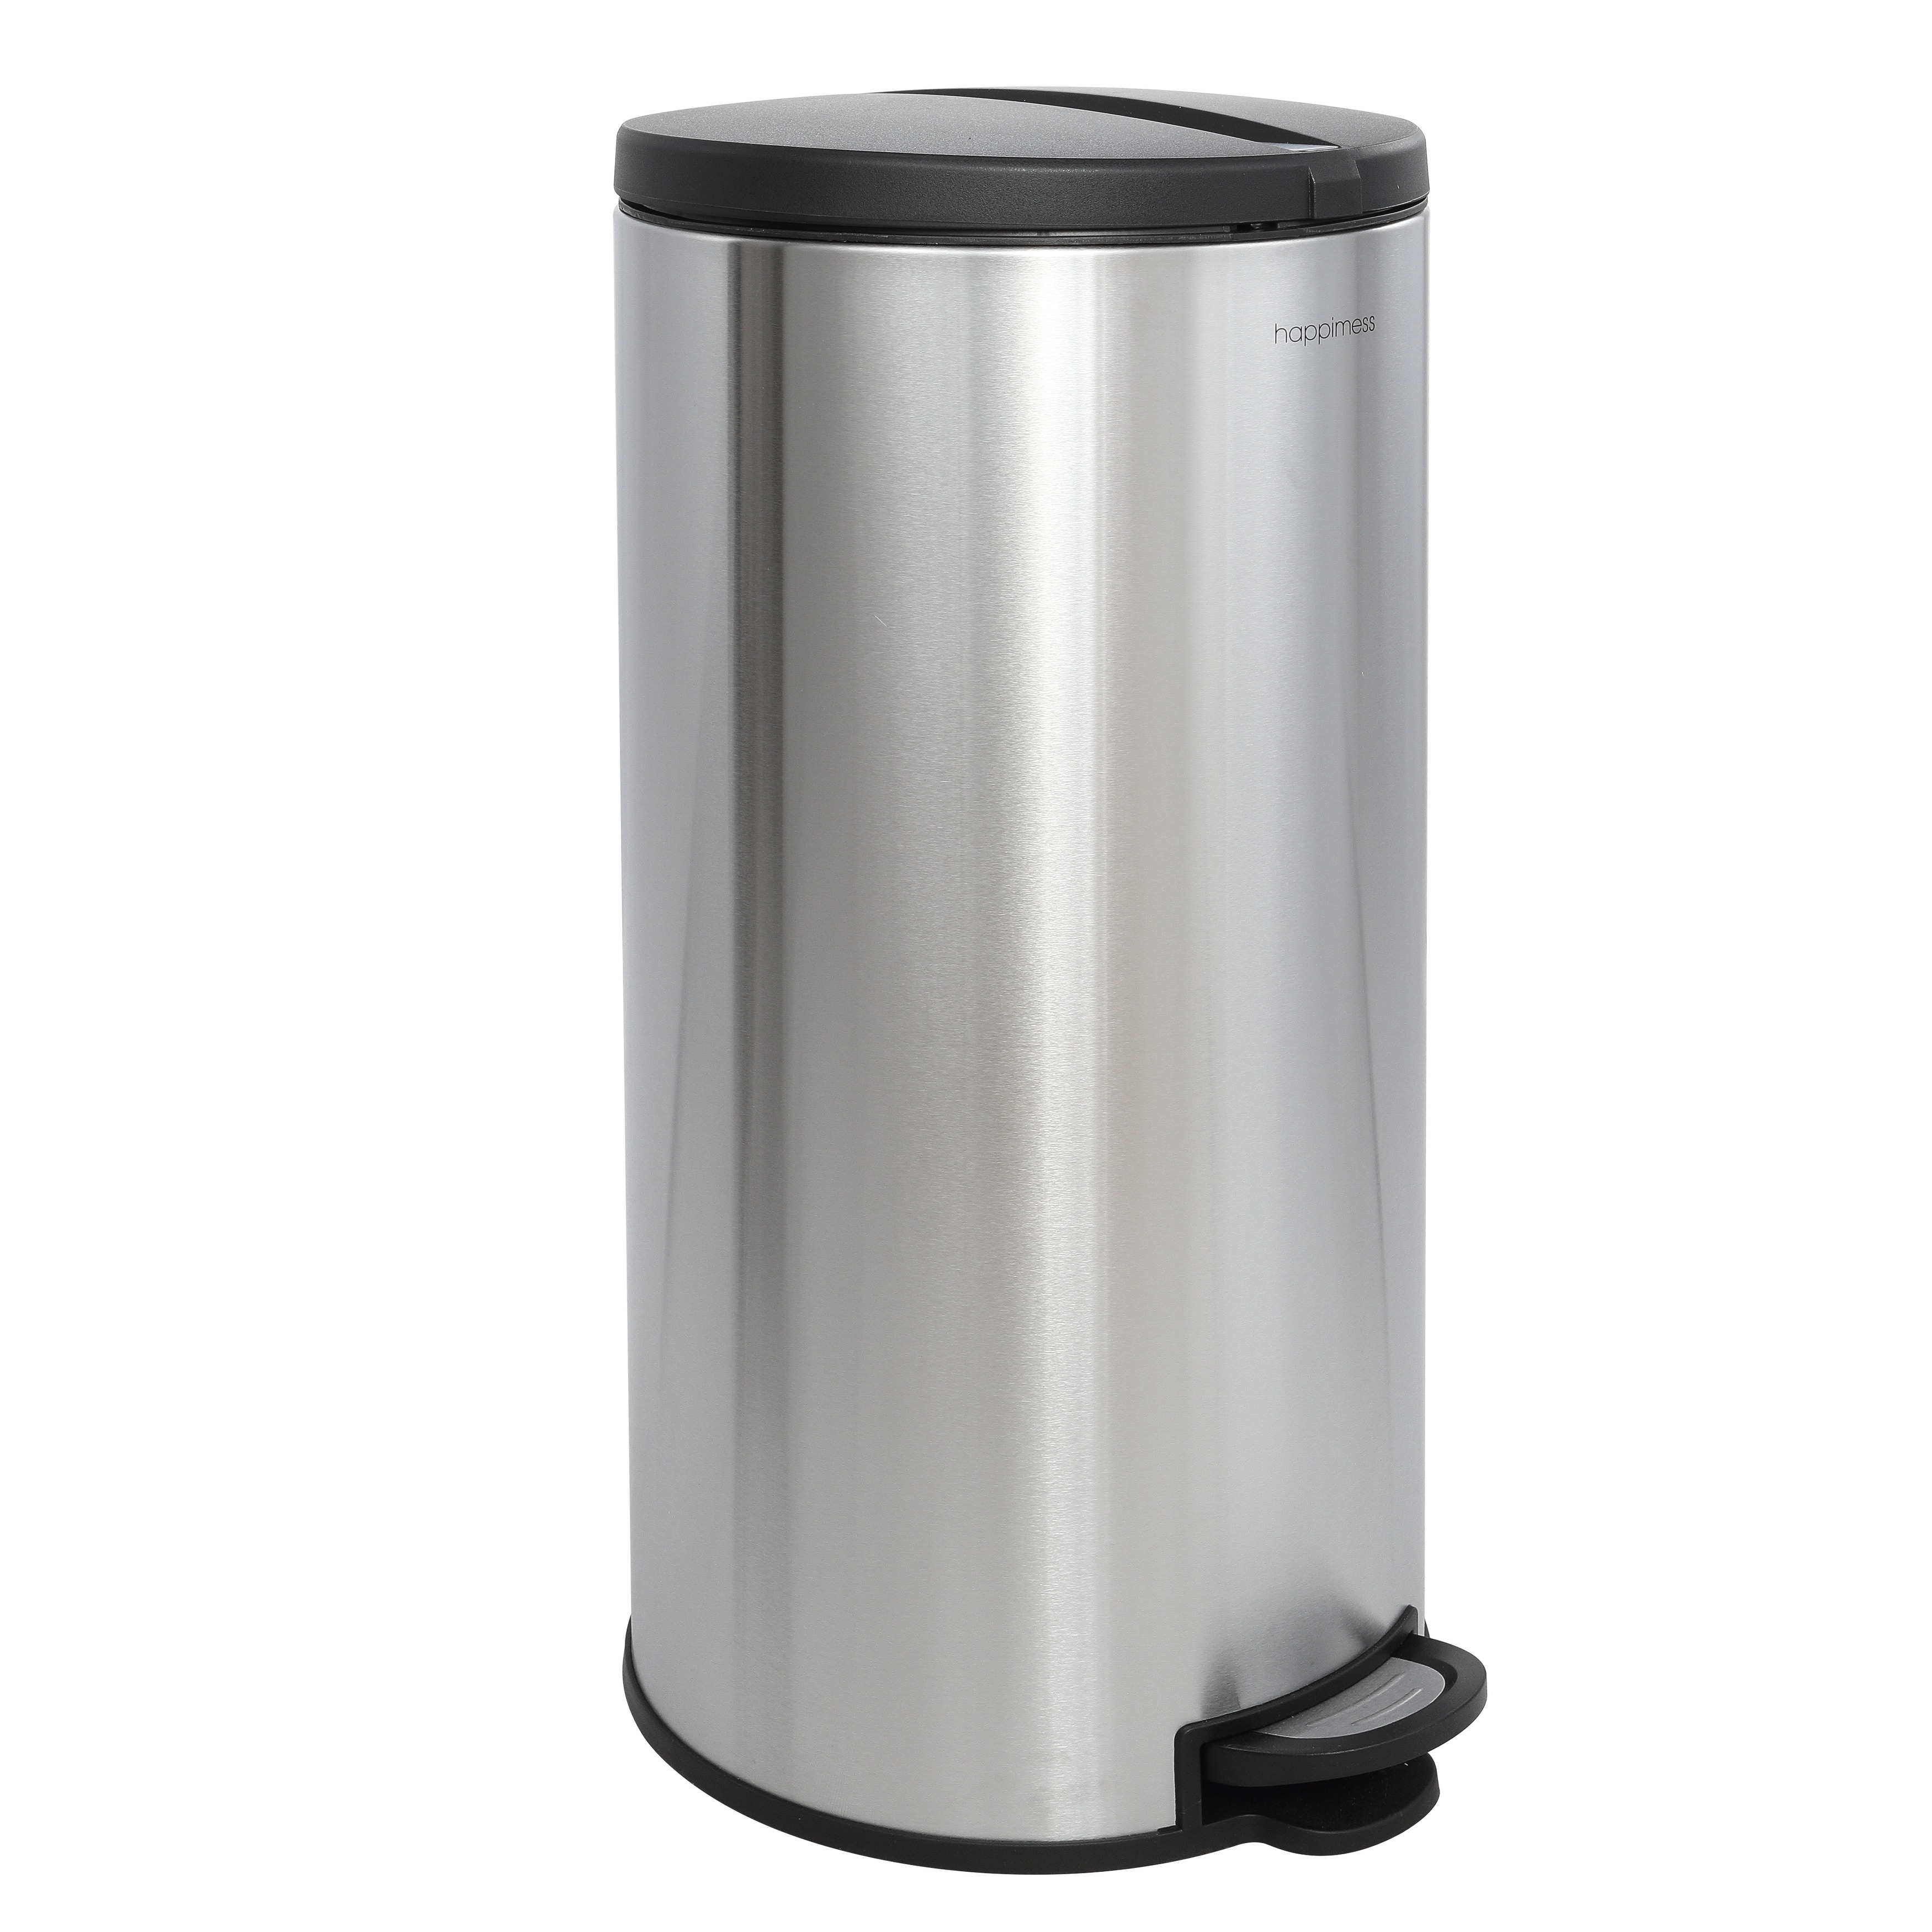 https://ak1.ostkcdn.com/images/products/is/images/direct/bb261e1743854781ee7552e8af03f2af360f127f/happimess-Oscar-Round-8-Gallon-Step-Open-Trash-Can-with-FREE-Mini-Trash-Can%2C-Stainless-Steel-Black.jpg